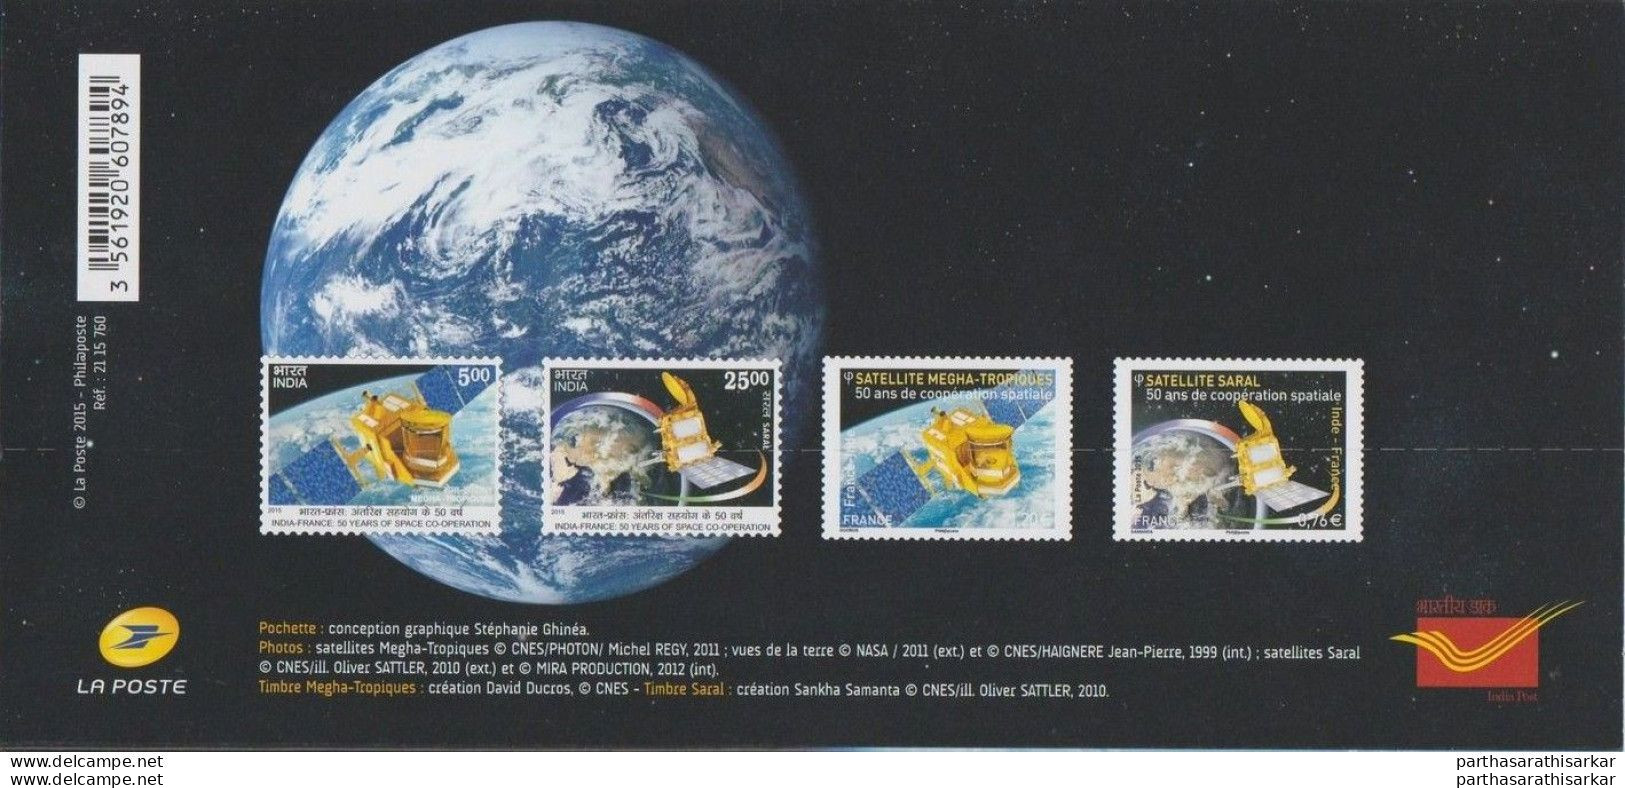 FRANCE 2015 JOINT ISSUE WITH INDIA SPACE PROGRAM OFFICIAL PRESENTATION PACK EXTREMELY RARE HARD TO FIND MNH - 2013-2018 Marianne Van Ciappa-Kawena